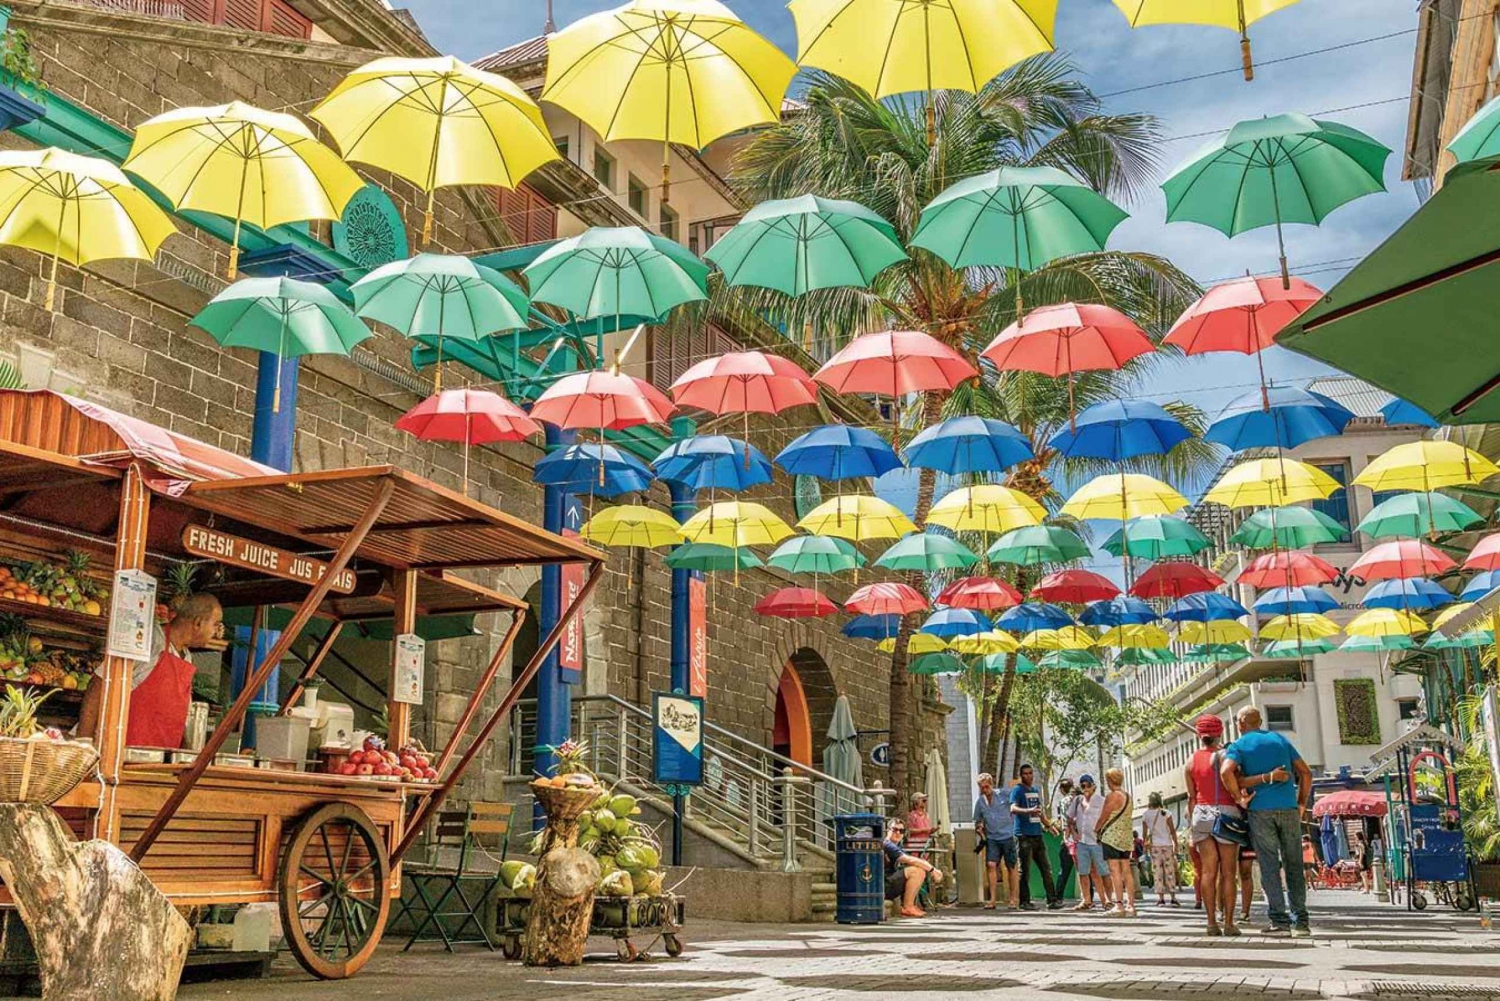 Mauritius: Port Louis and Northern Highlights Full-Day Trip